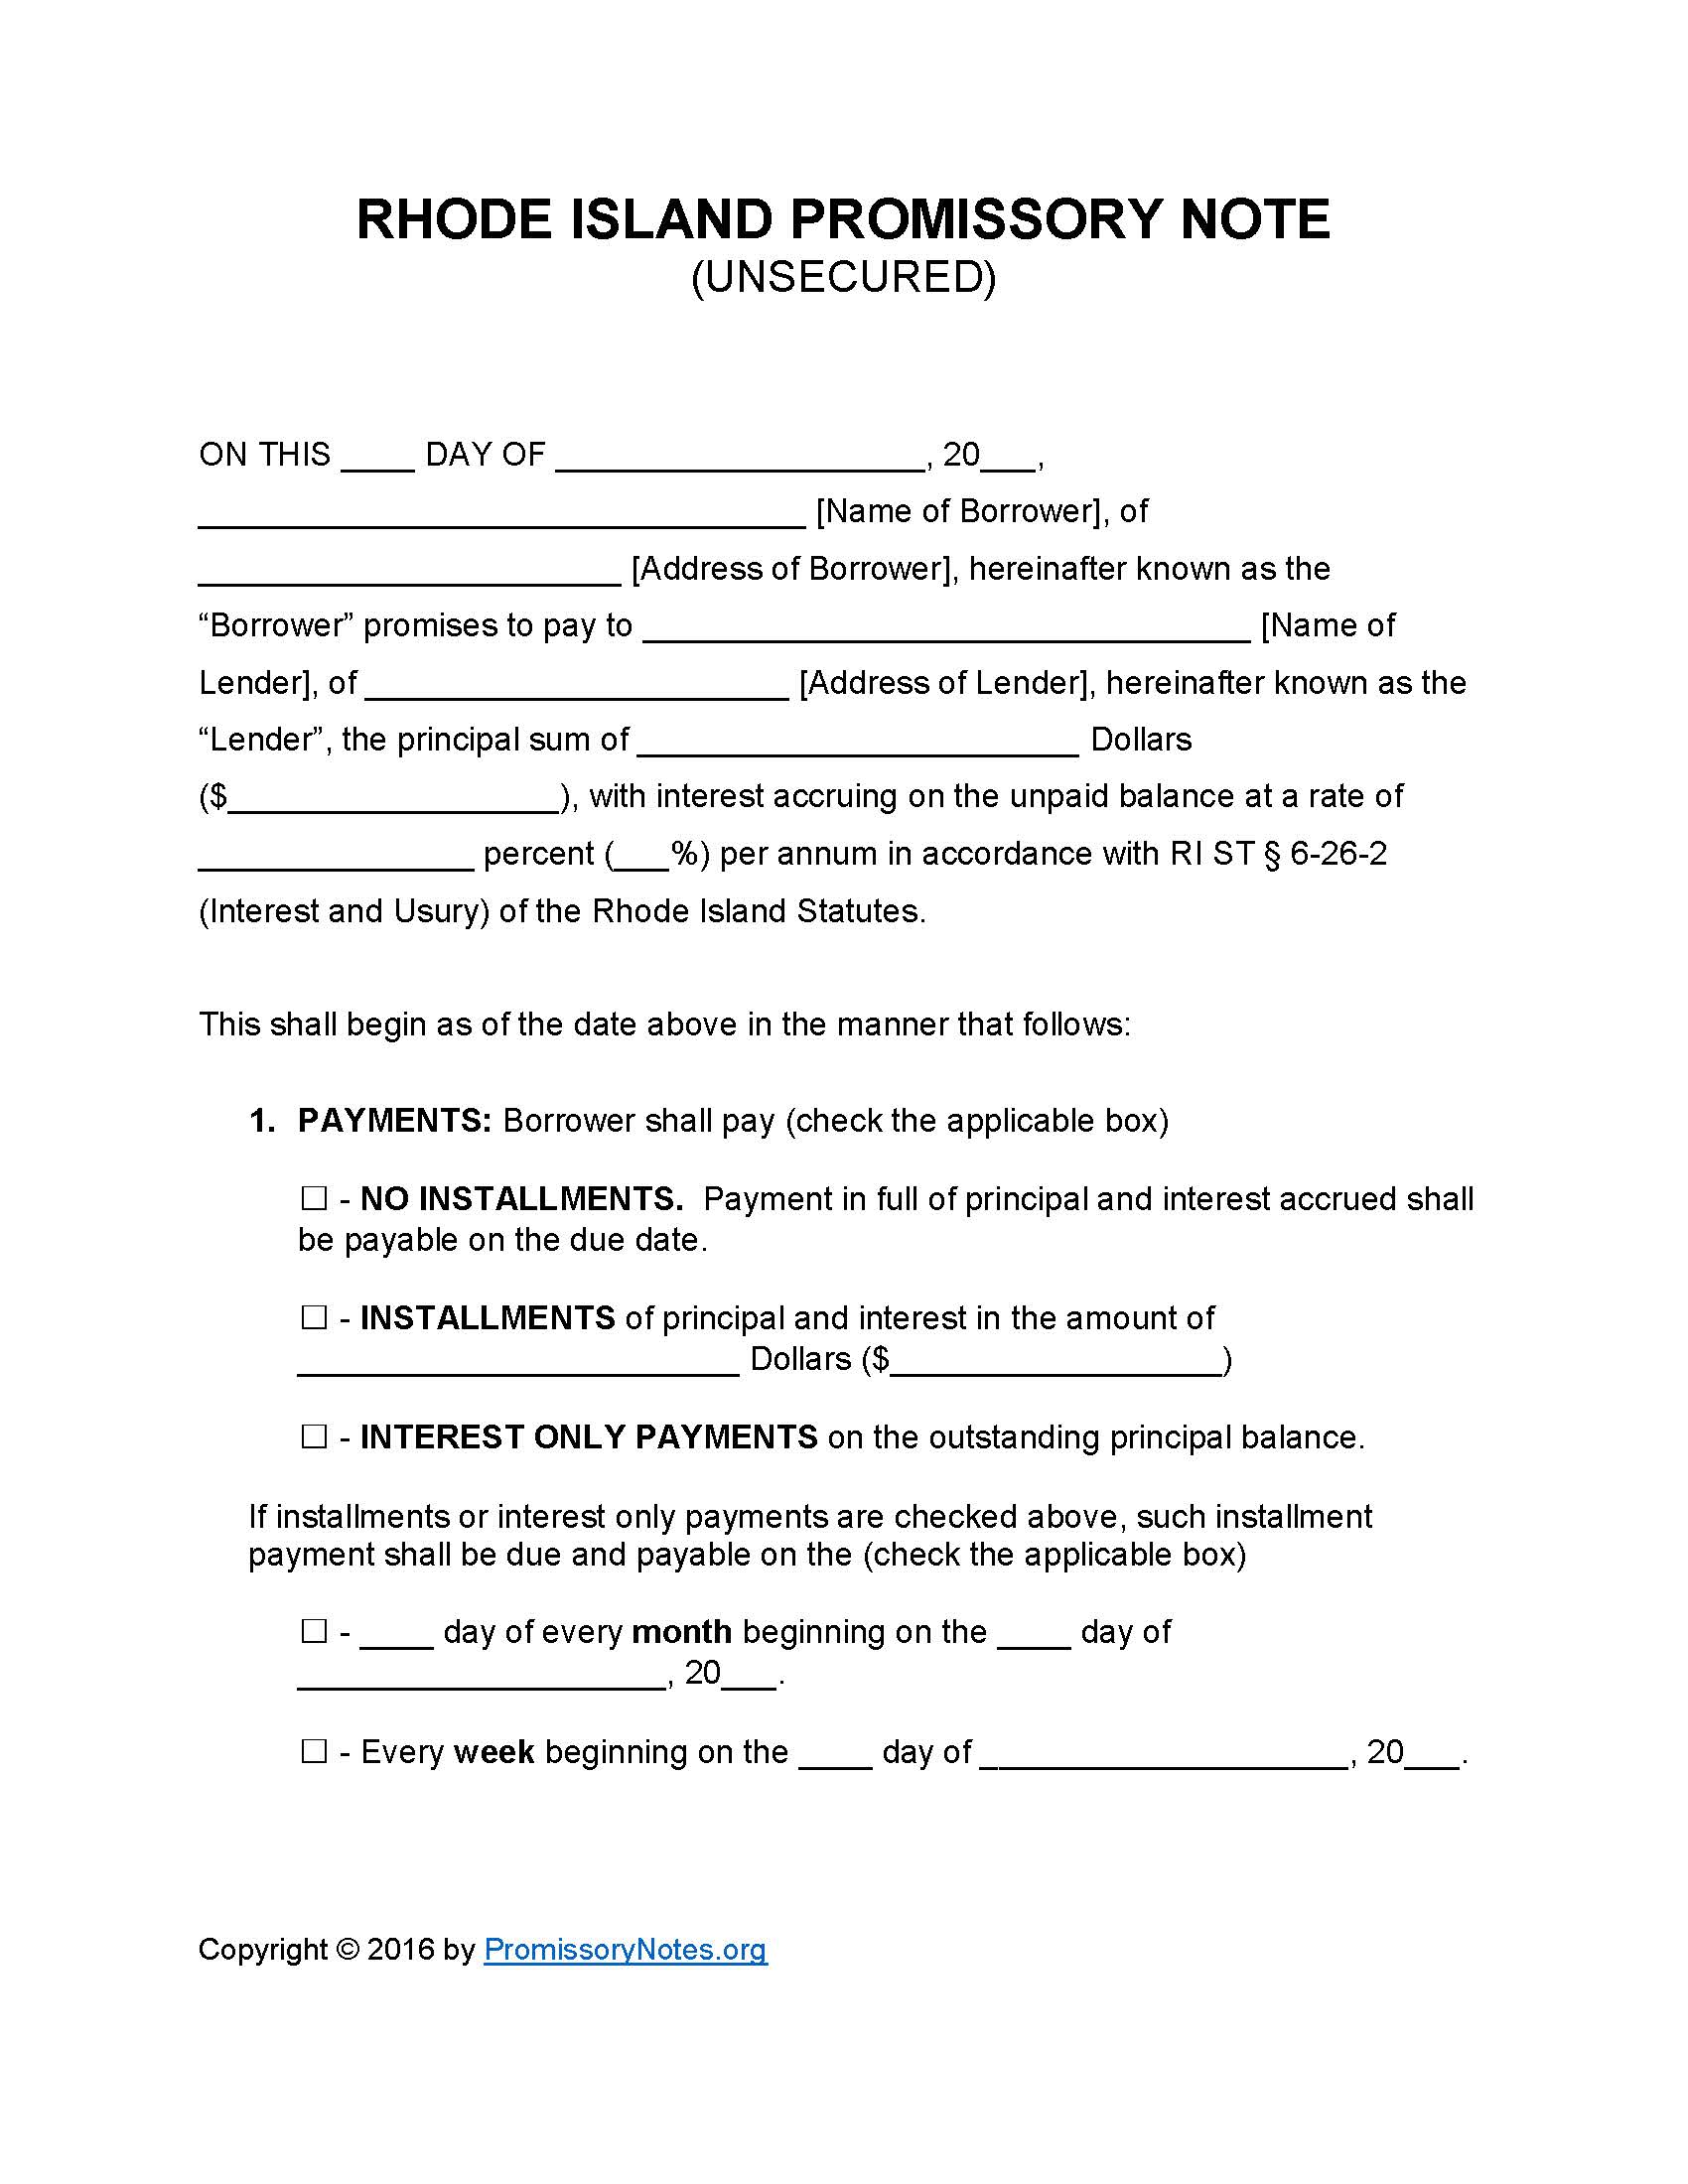 rhode-island-unsecured-promissory-note-form